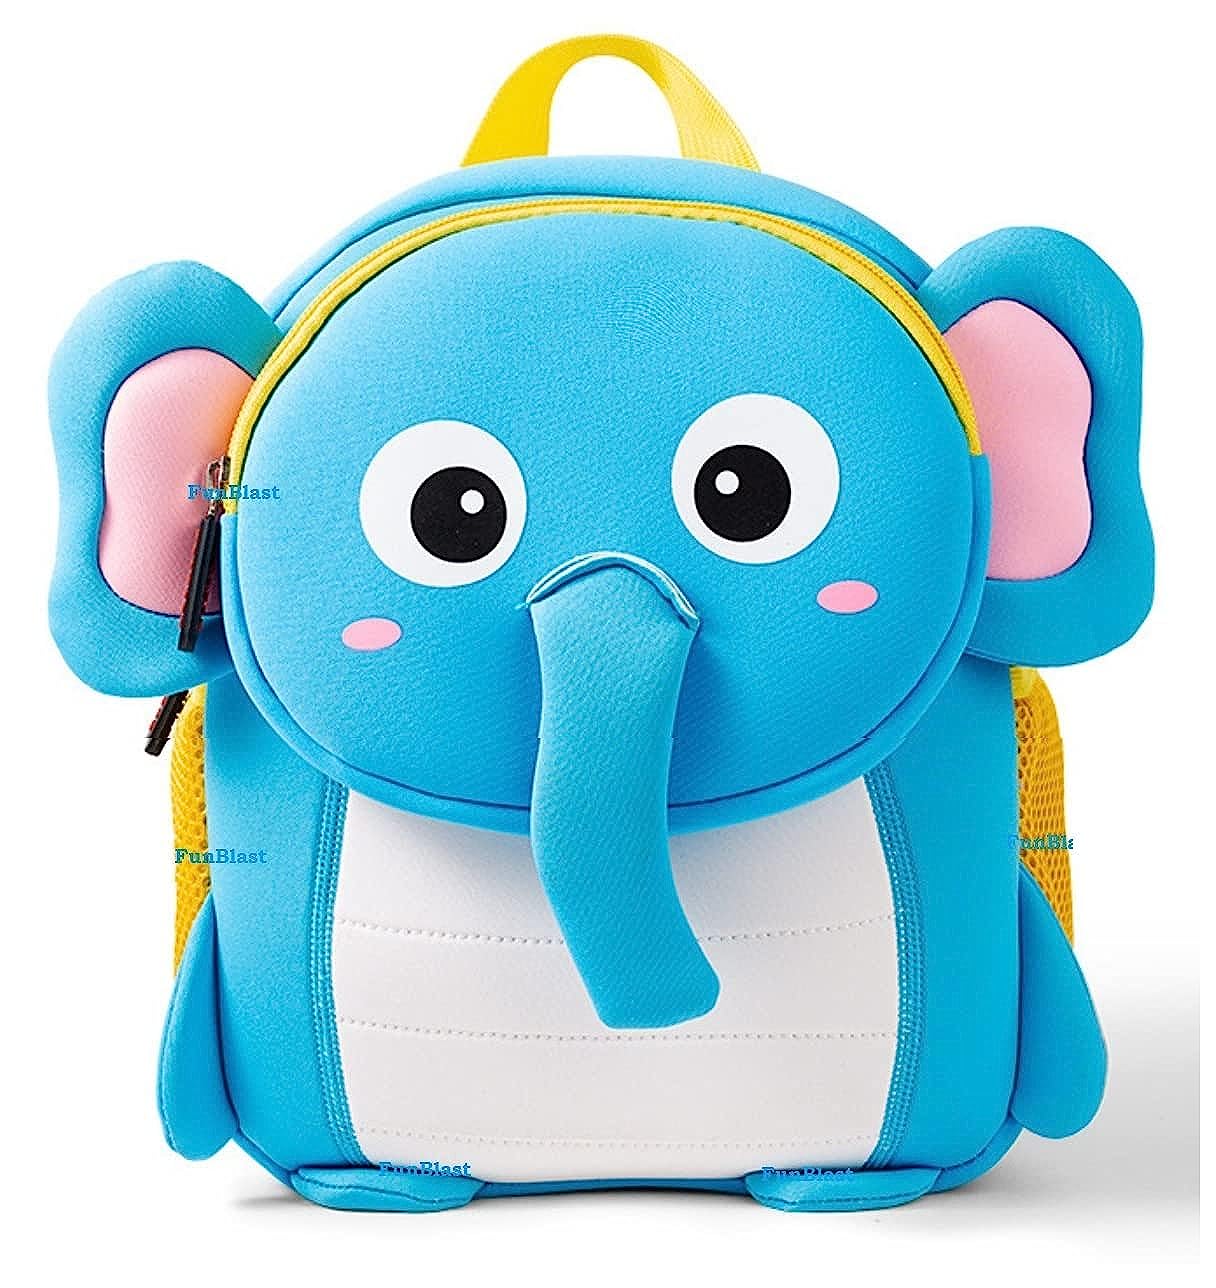 Buy Disney Cars Design Kids Plush Backpack Toy School Bag Children's Gifts  Baby Backpack Boy/girl Baby Student Bags at Best Price in Pakistan